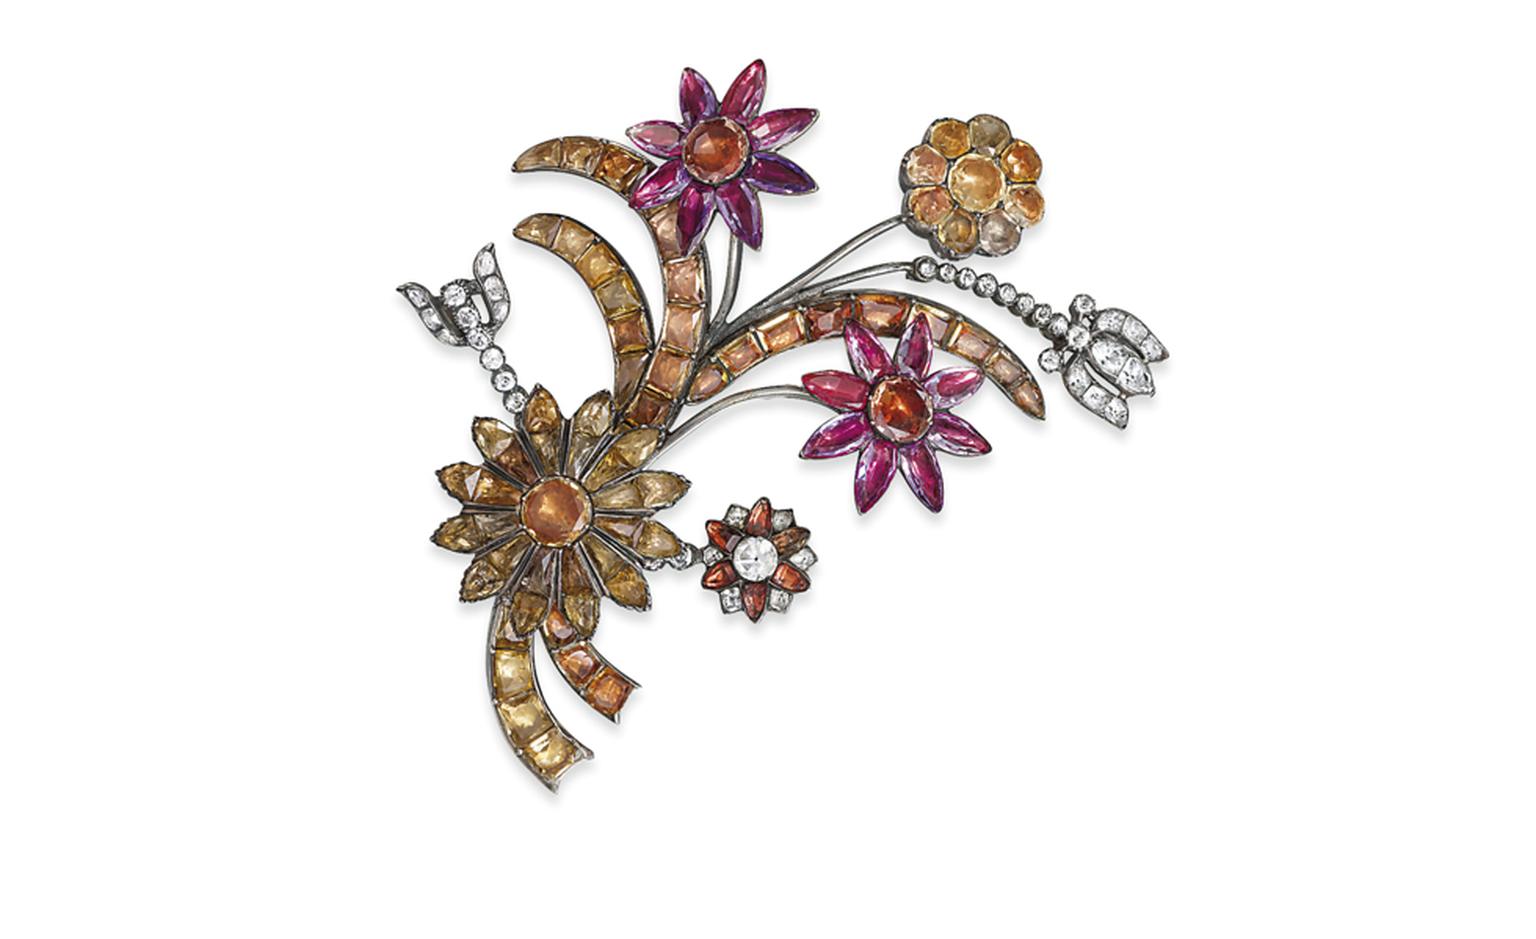 Lot 167. A rare 18th century topaz and paste flower brooch. Estimate £10,000-£15,000. SOLD FOR £12,500